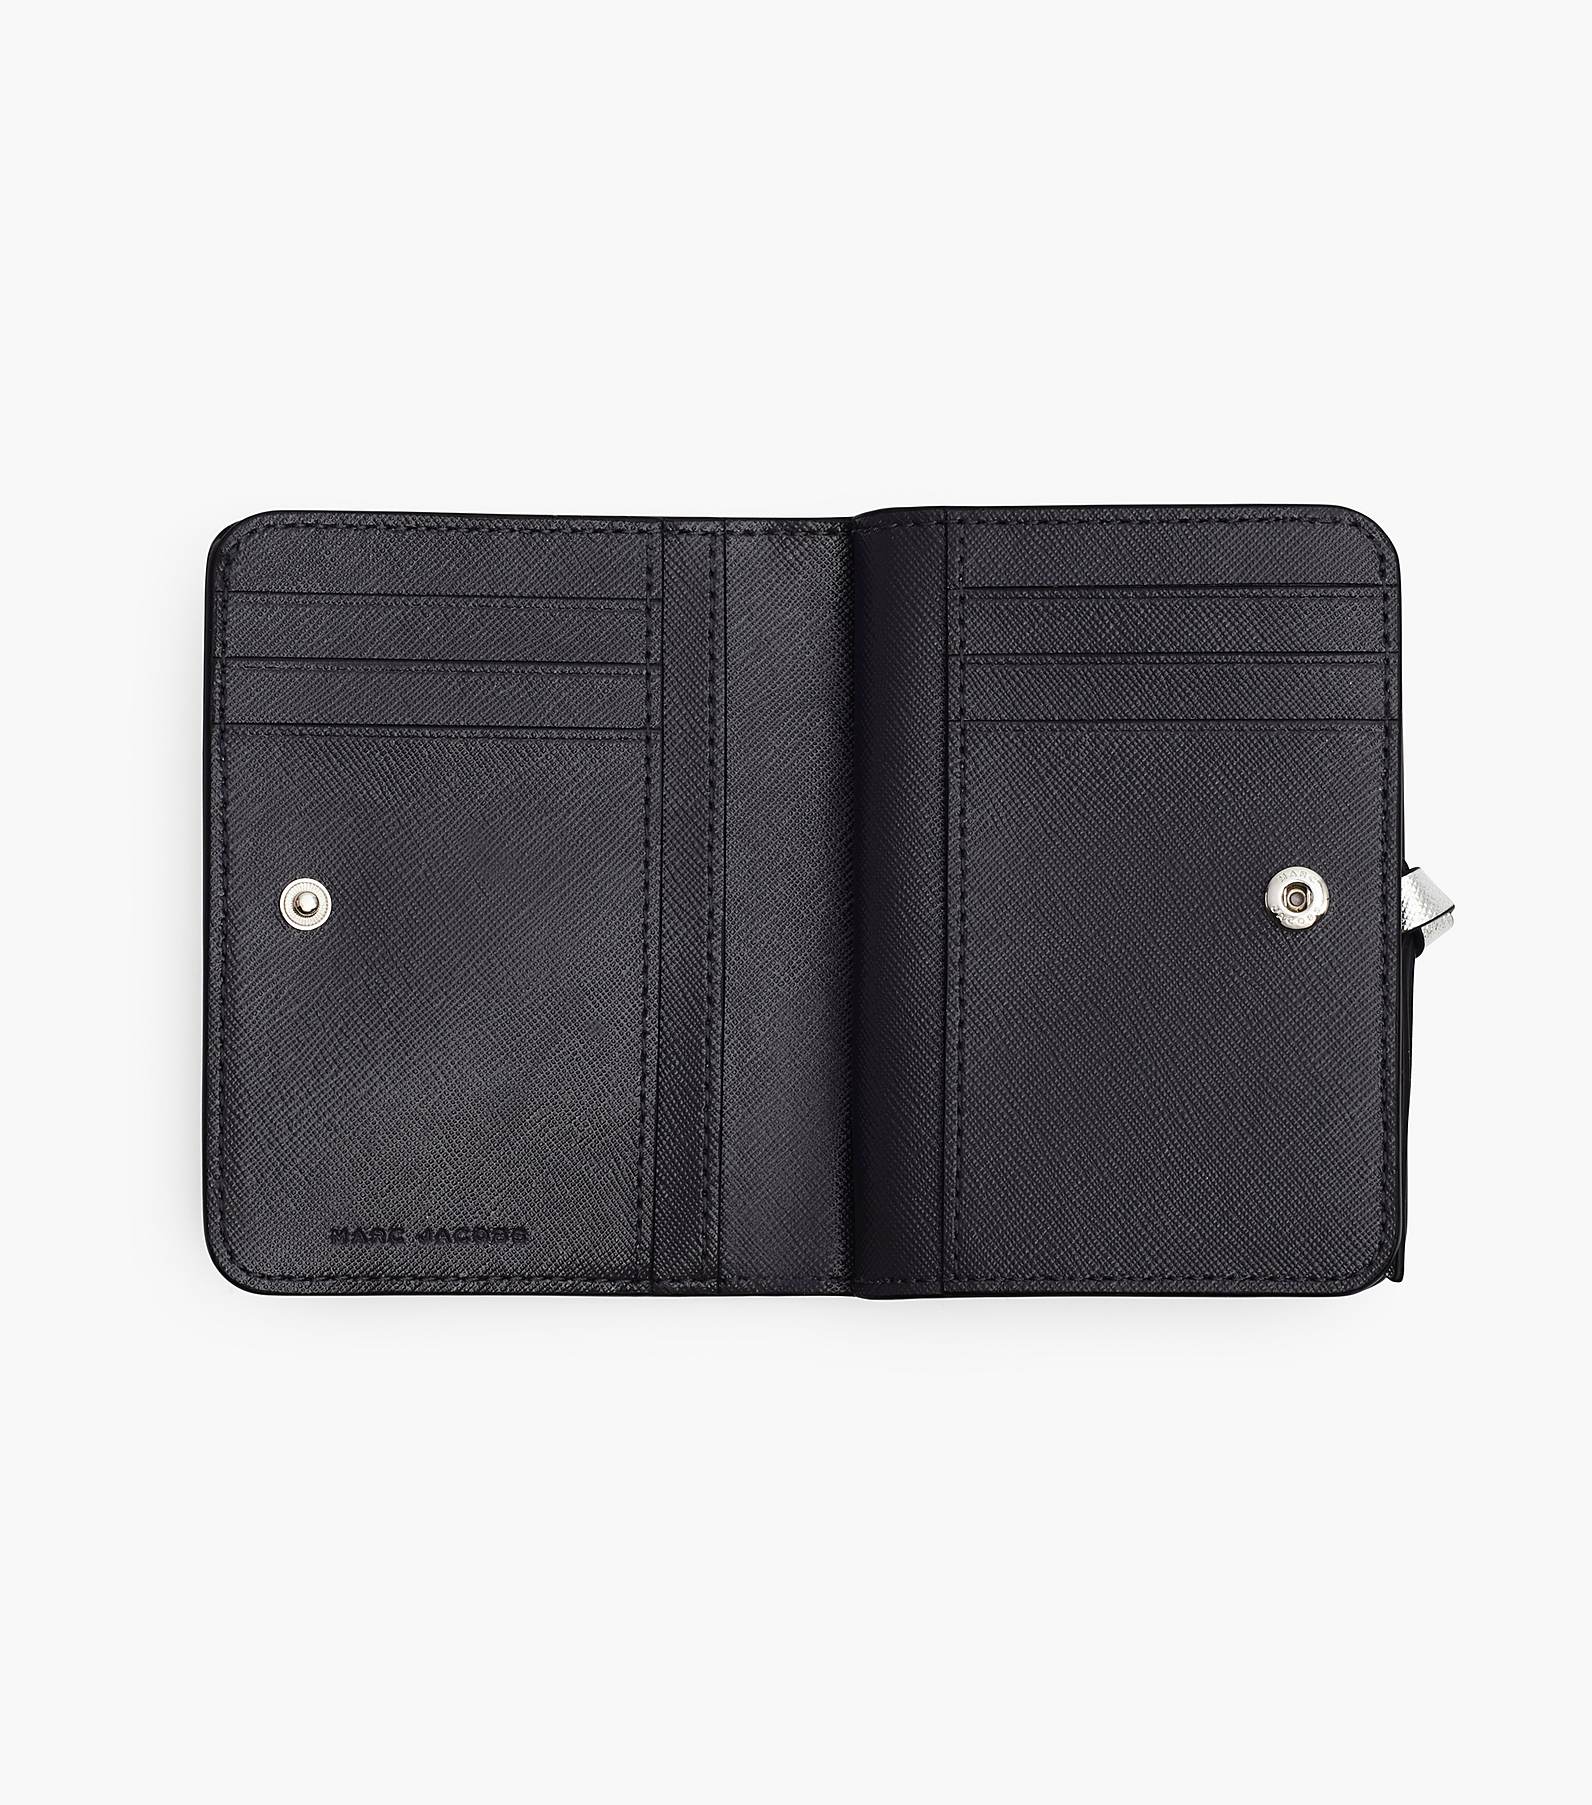 THE UTILITY SNAPSHOT COMPACT WALLET MINI | マーク ジェイコブス